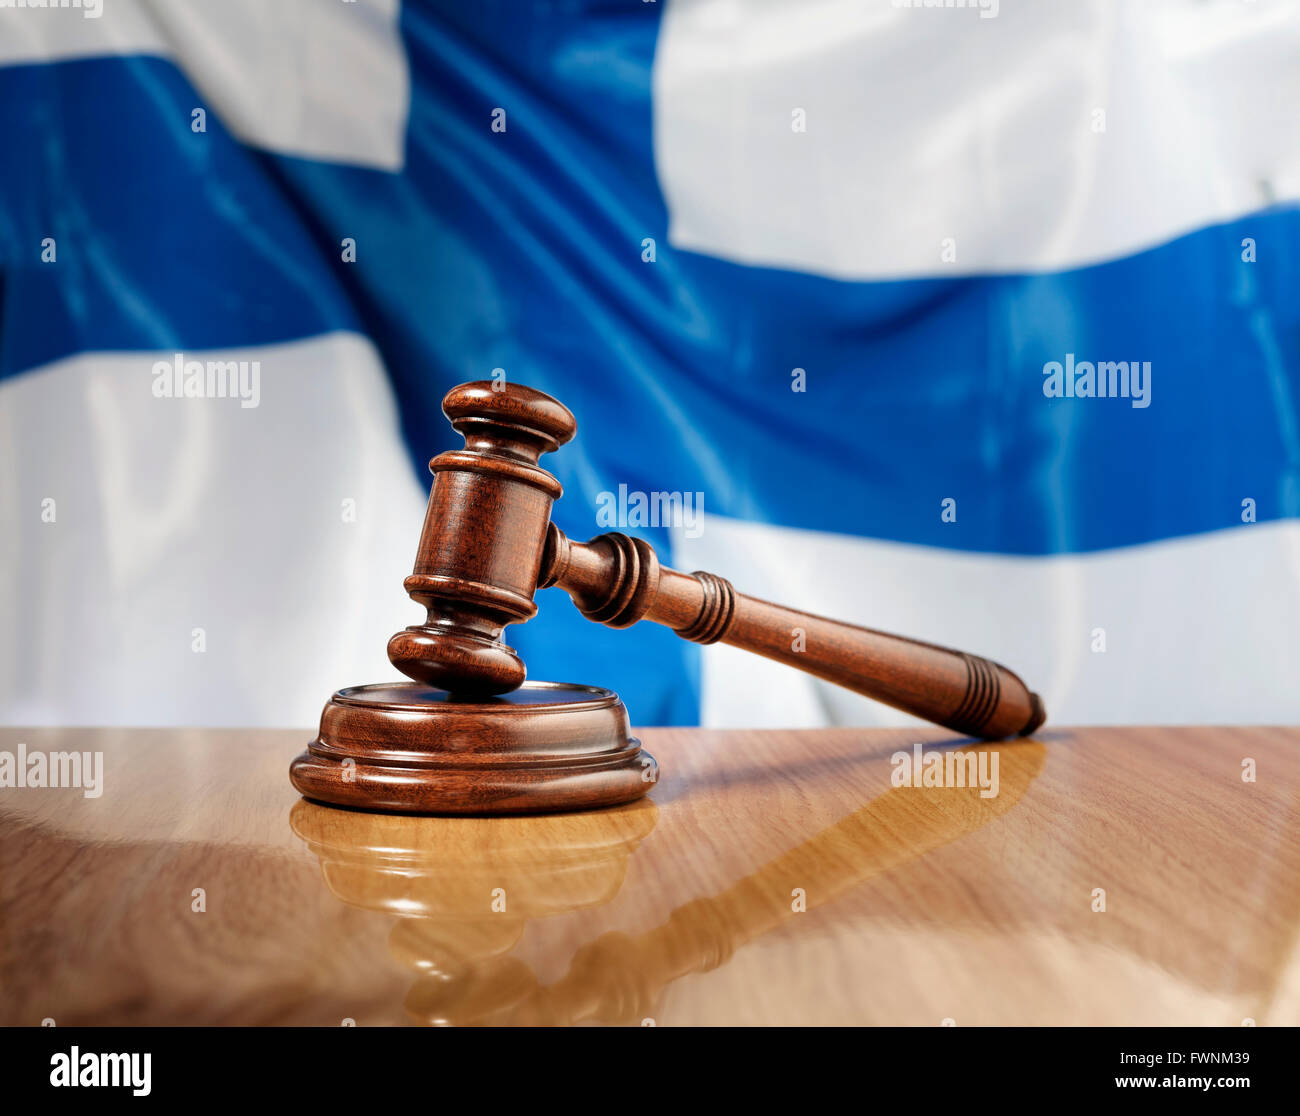 Mahogany wooden gavel on glossy wooden table, flag of Finland in the background. Stock Photo